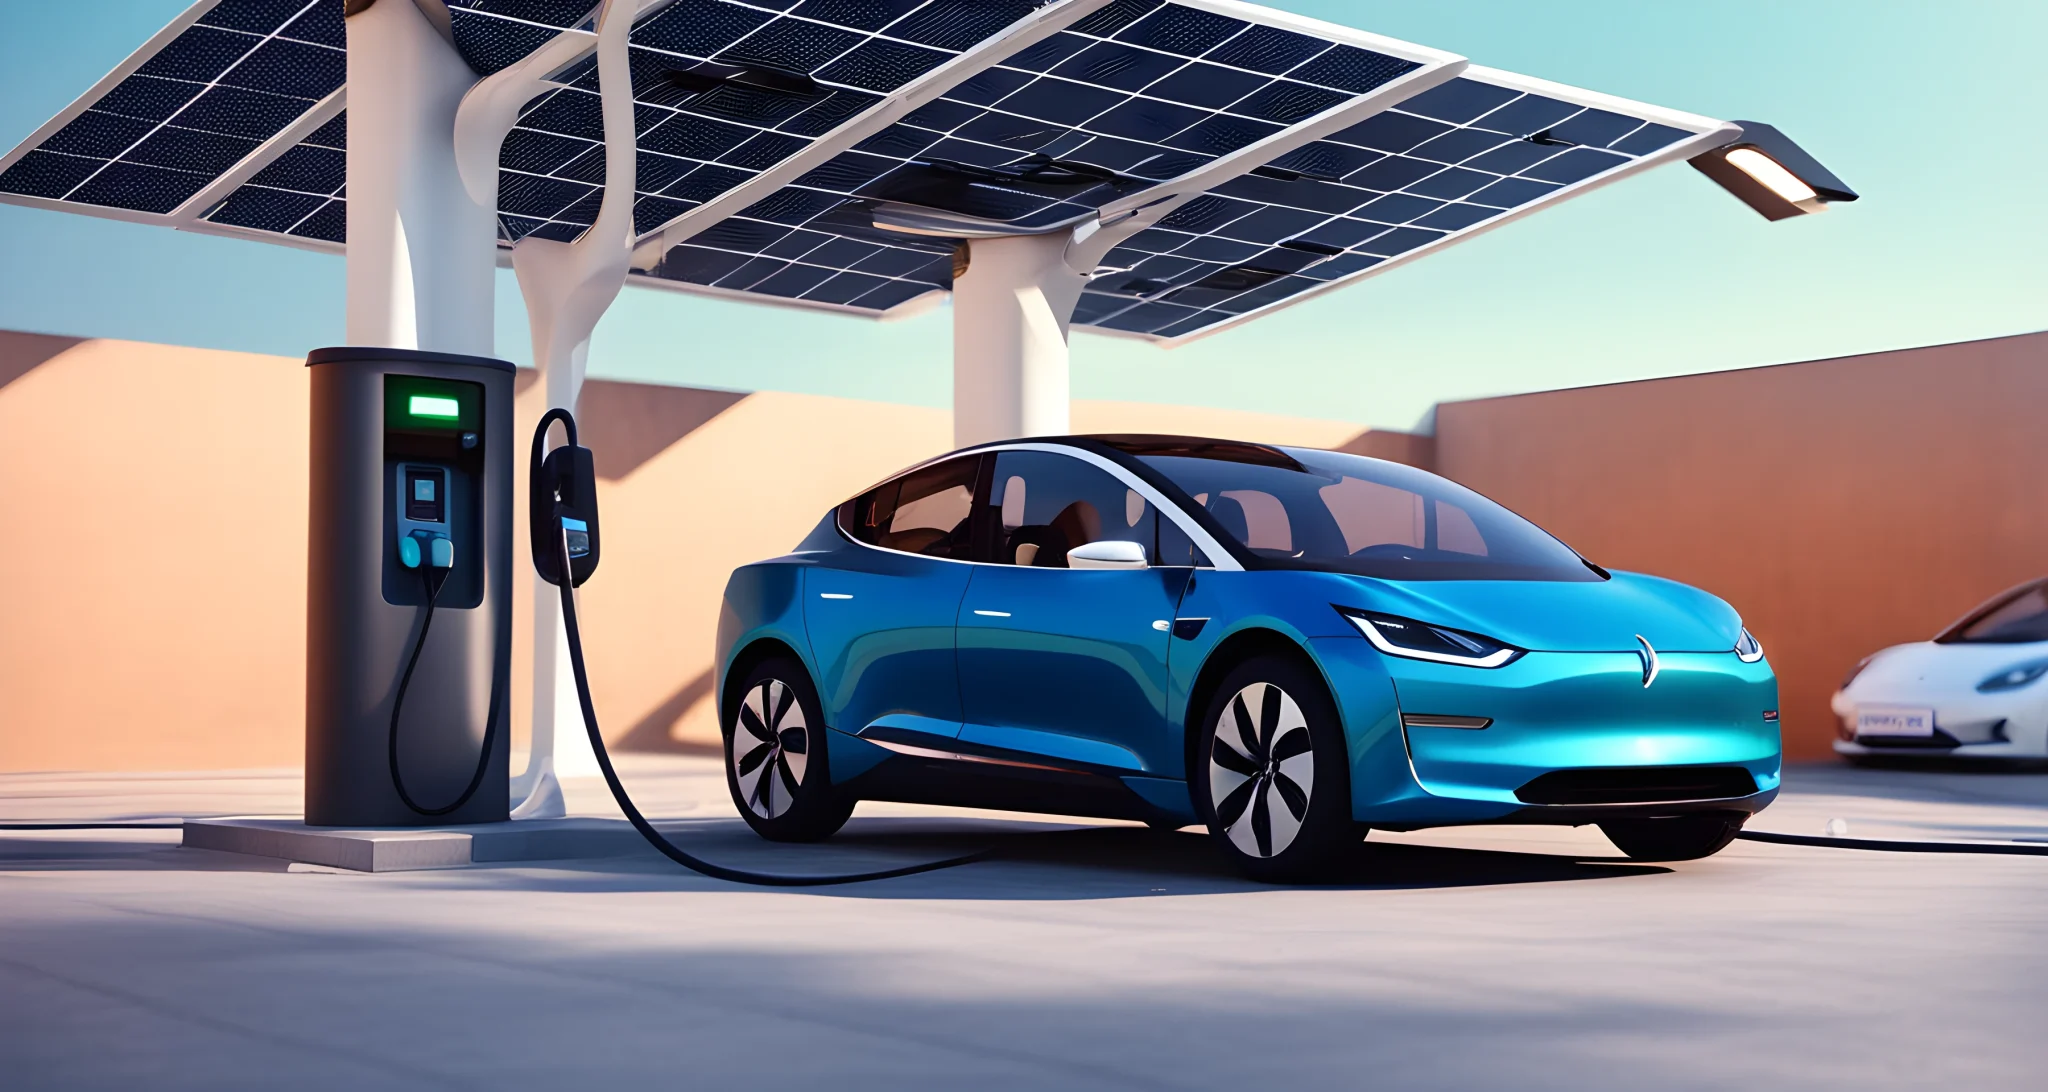 The image shows a sleek electric car charging at a charging station, with solar panels in the background.